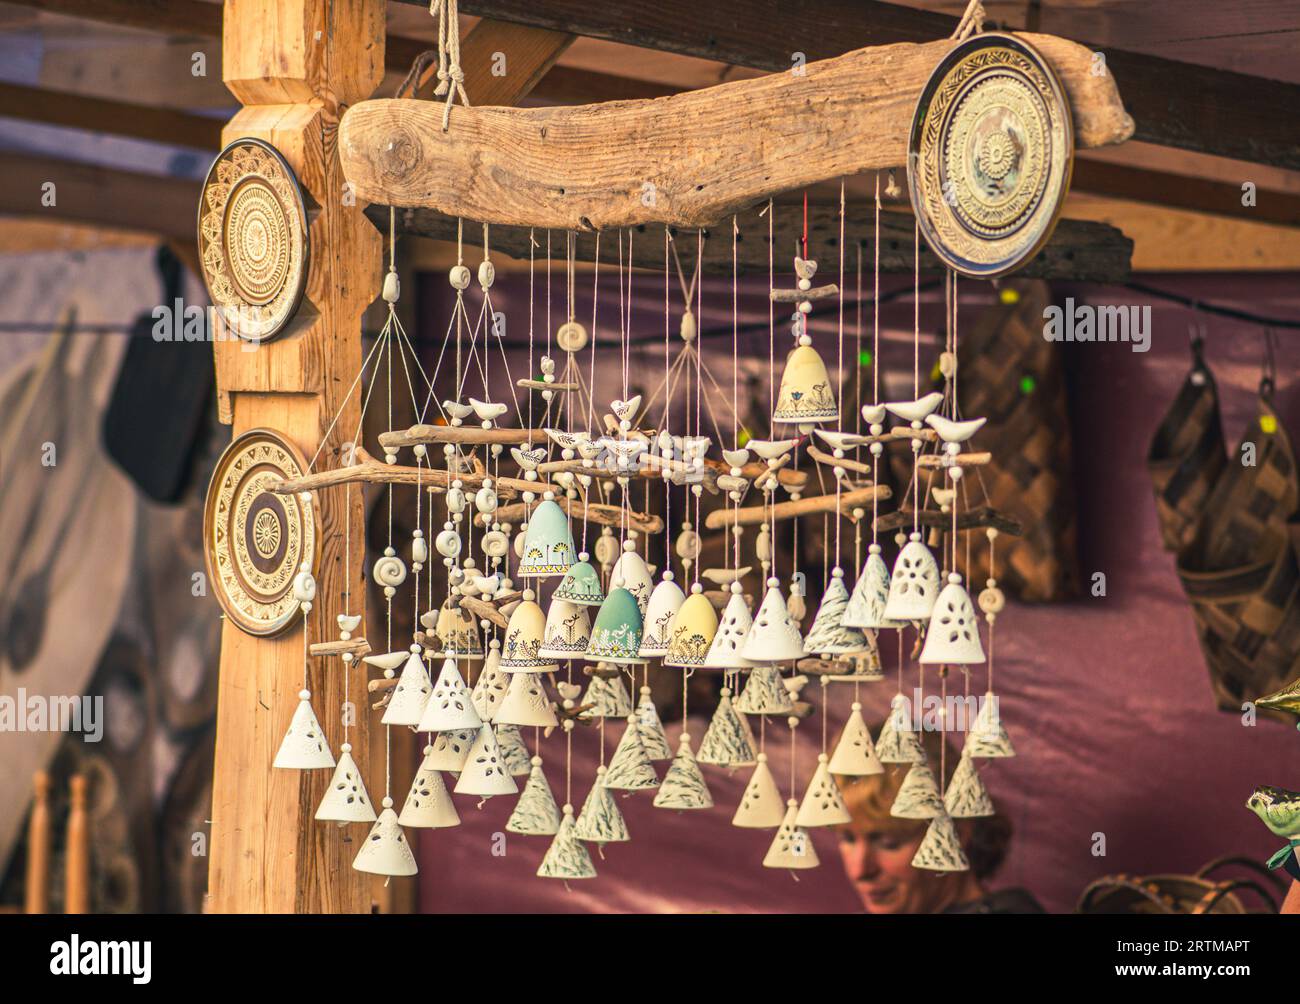 Cute ceramic traditional bells in a folk arts and crafts fair or market in Vilnius, Lithuania, Europe Stock Photo